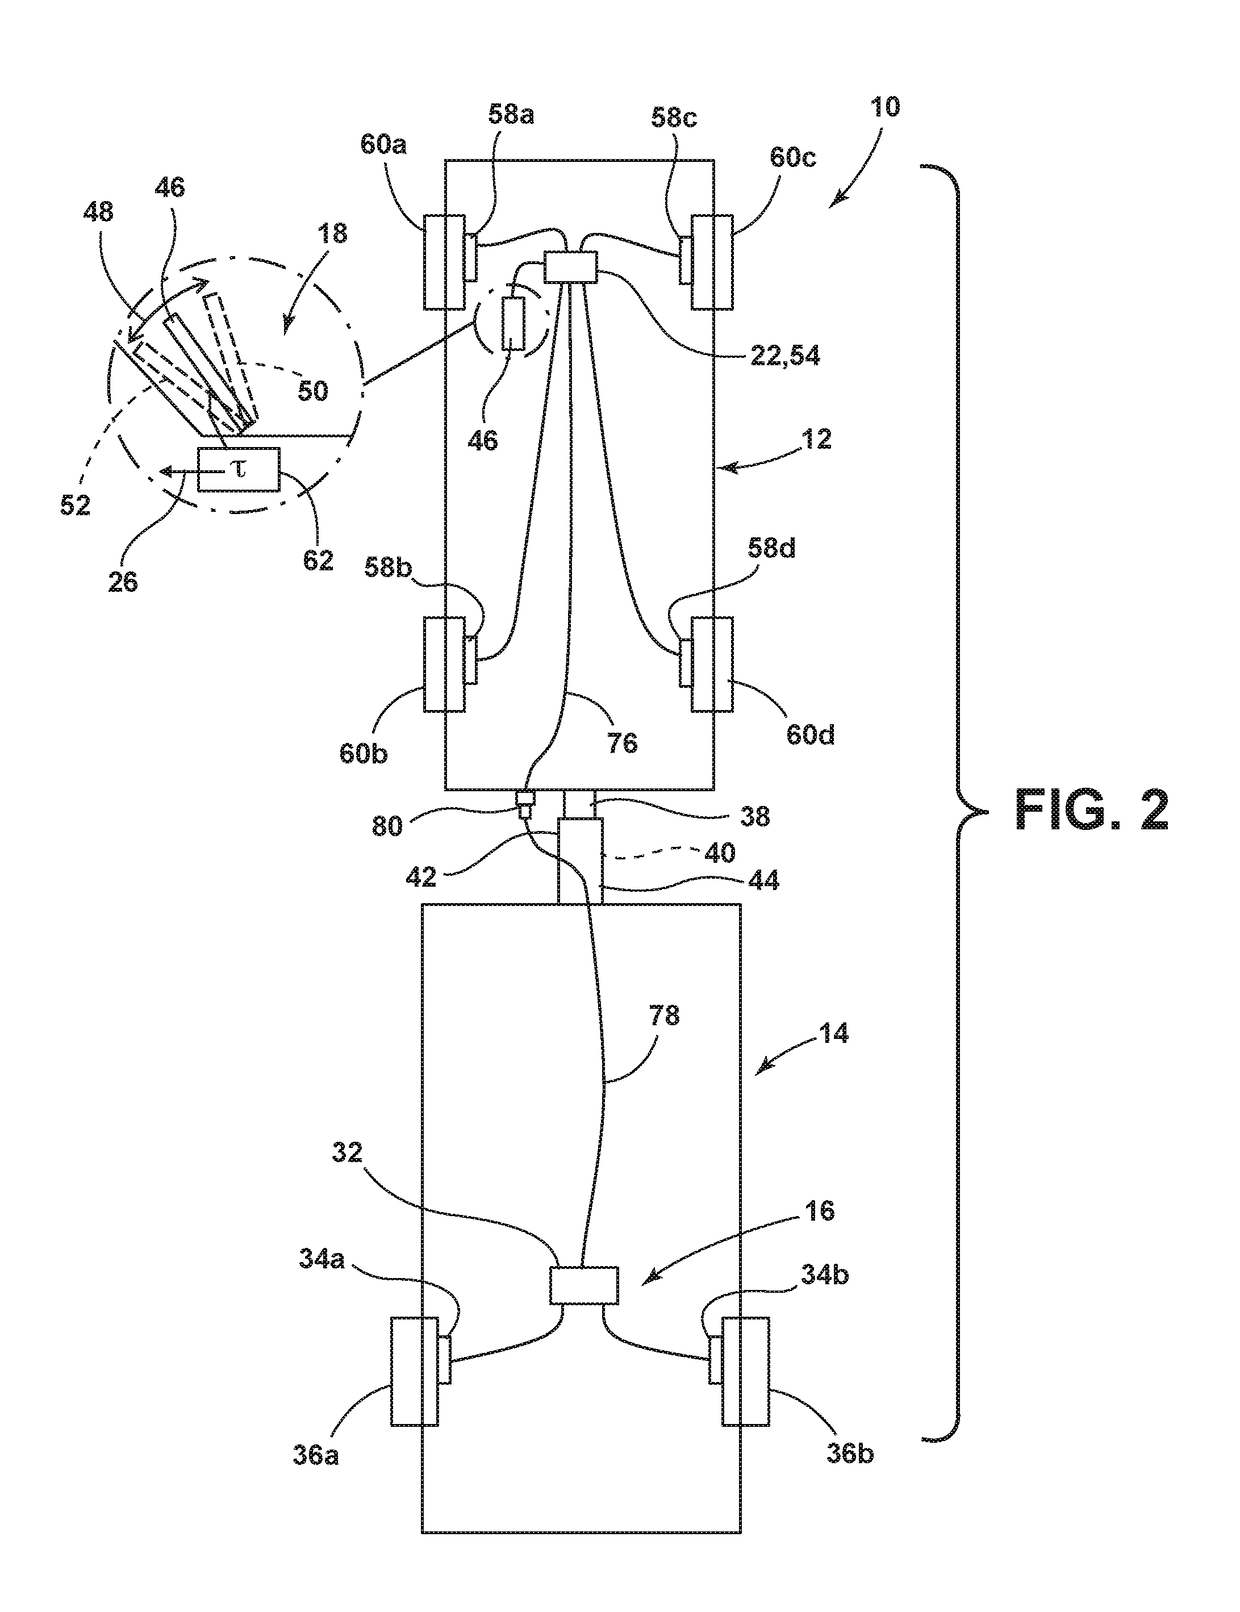 Method to automatically adjust a trailer brake controller